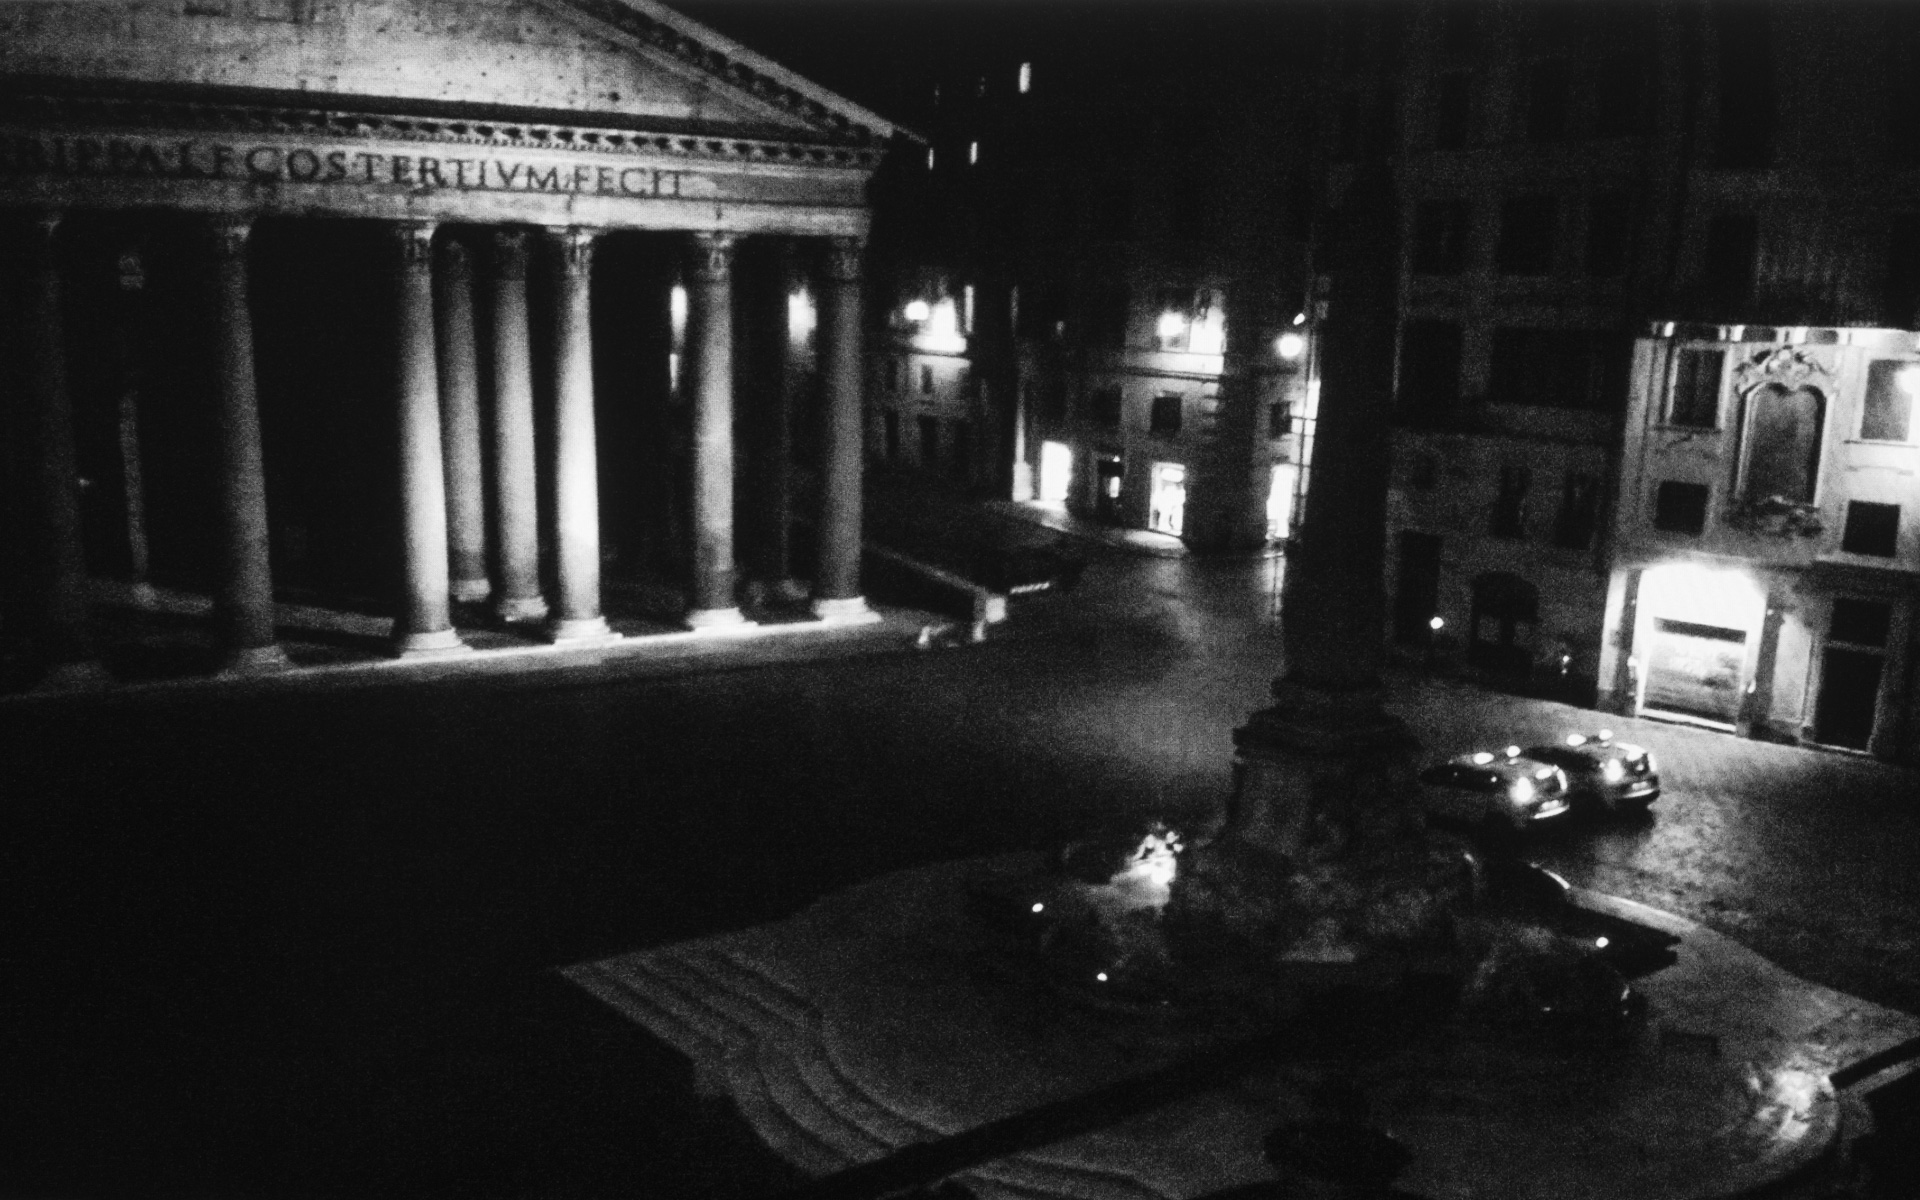 Rome, Pantheon - Two police cars blinking in the front of Pantheon. Rome, March 25. 2020.